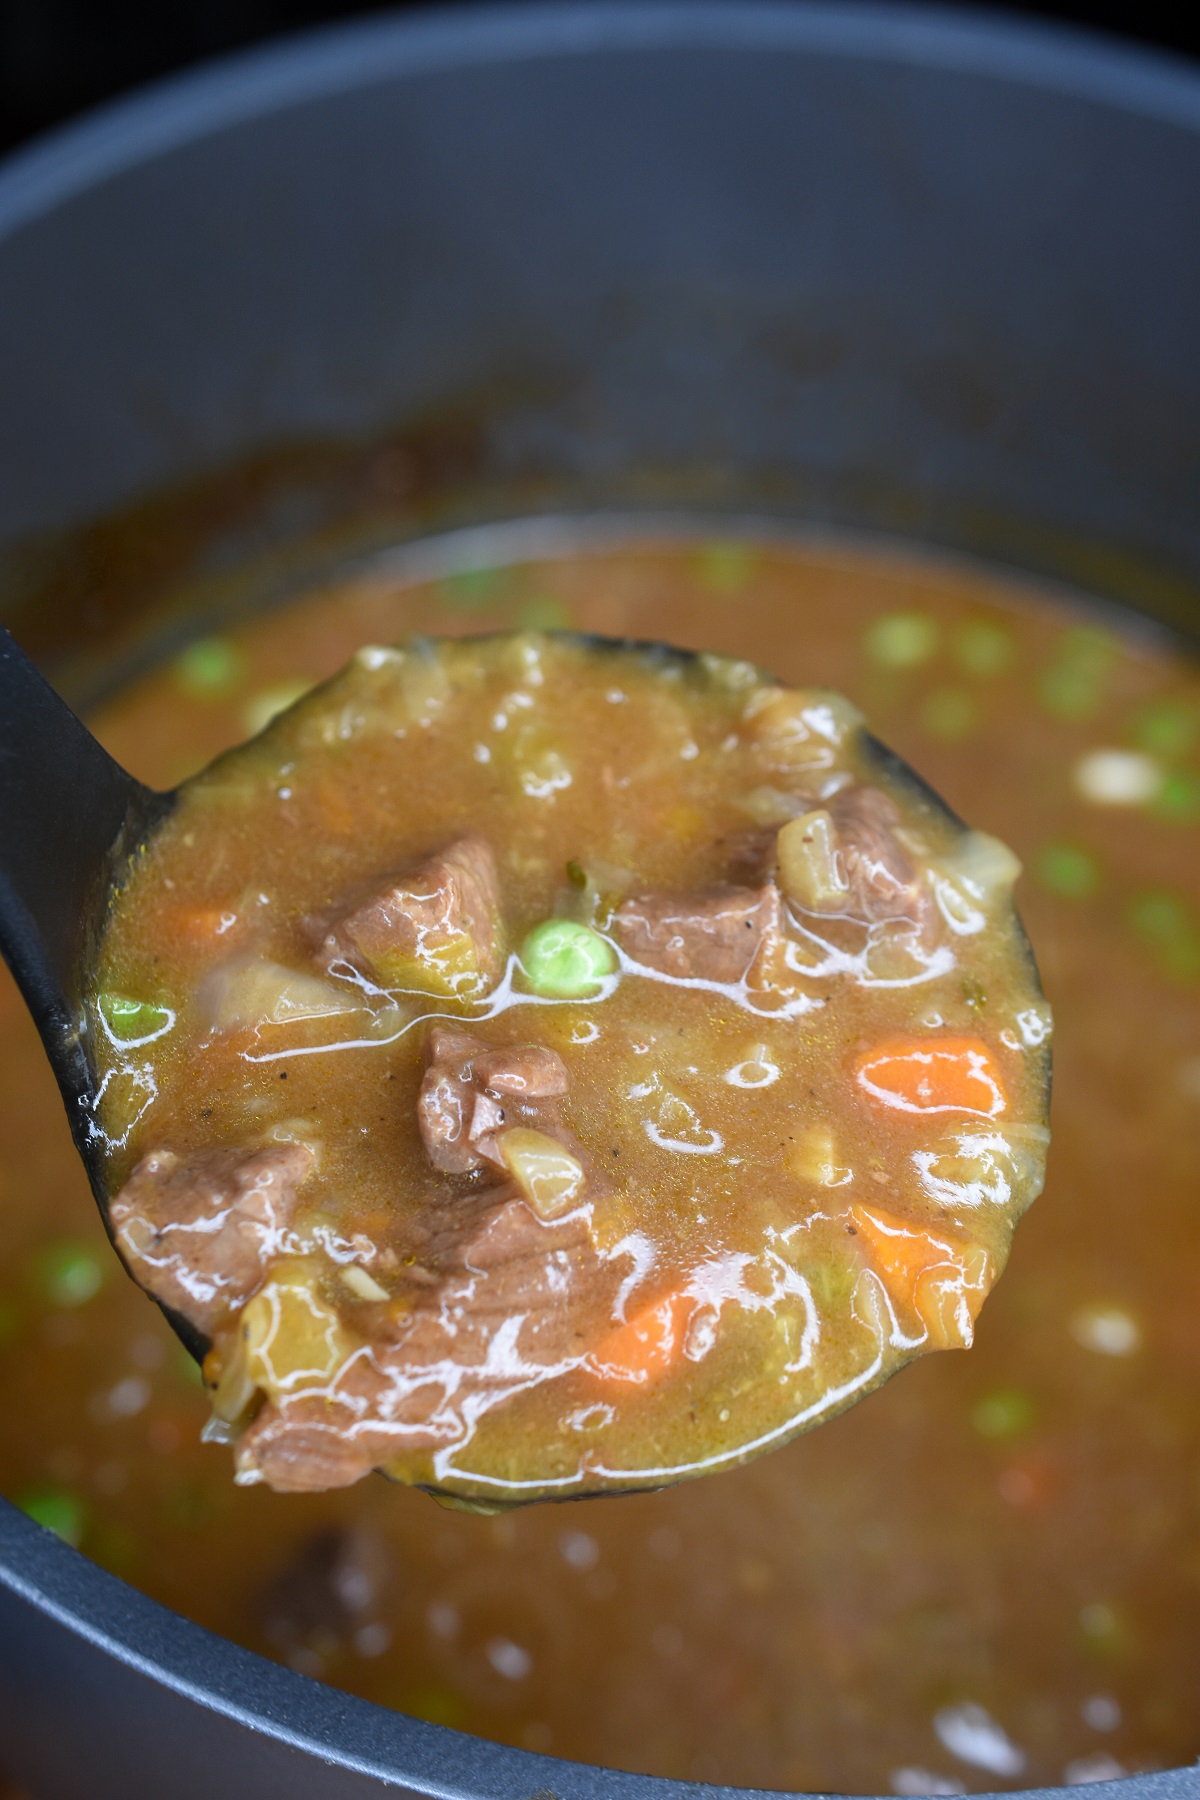 Call this Irish Stew, Guinness Stew or Beef stew, just call it delicious! Pure comfort food.